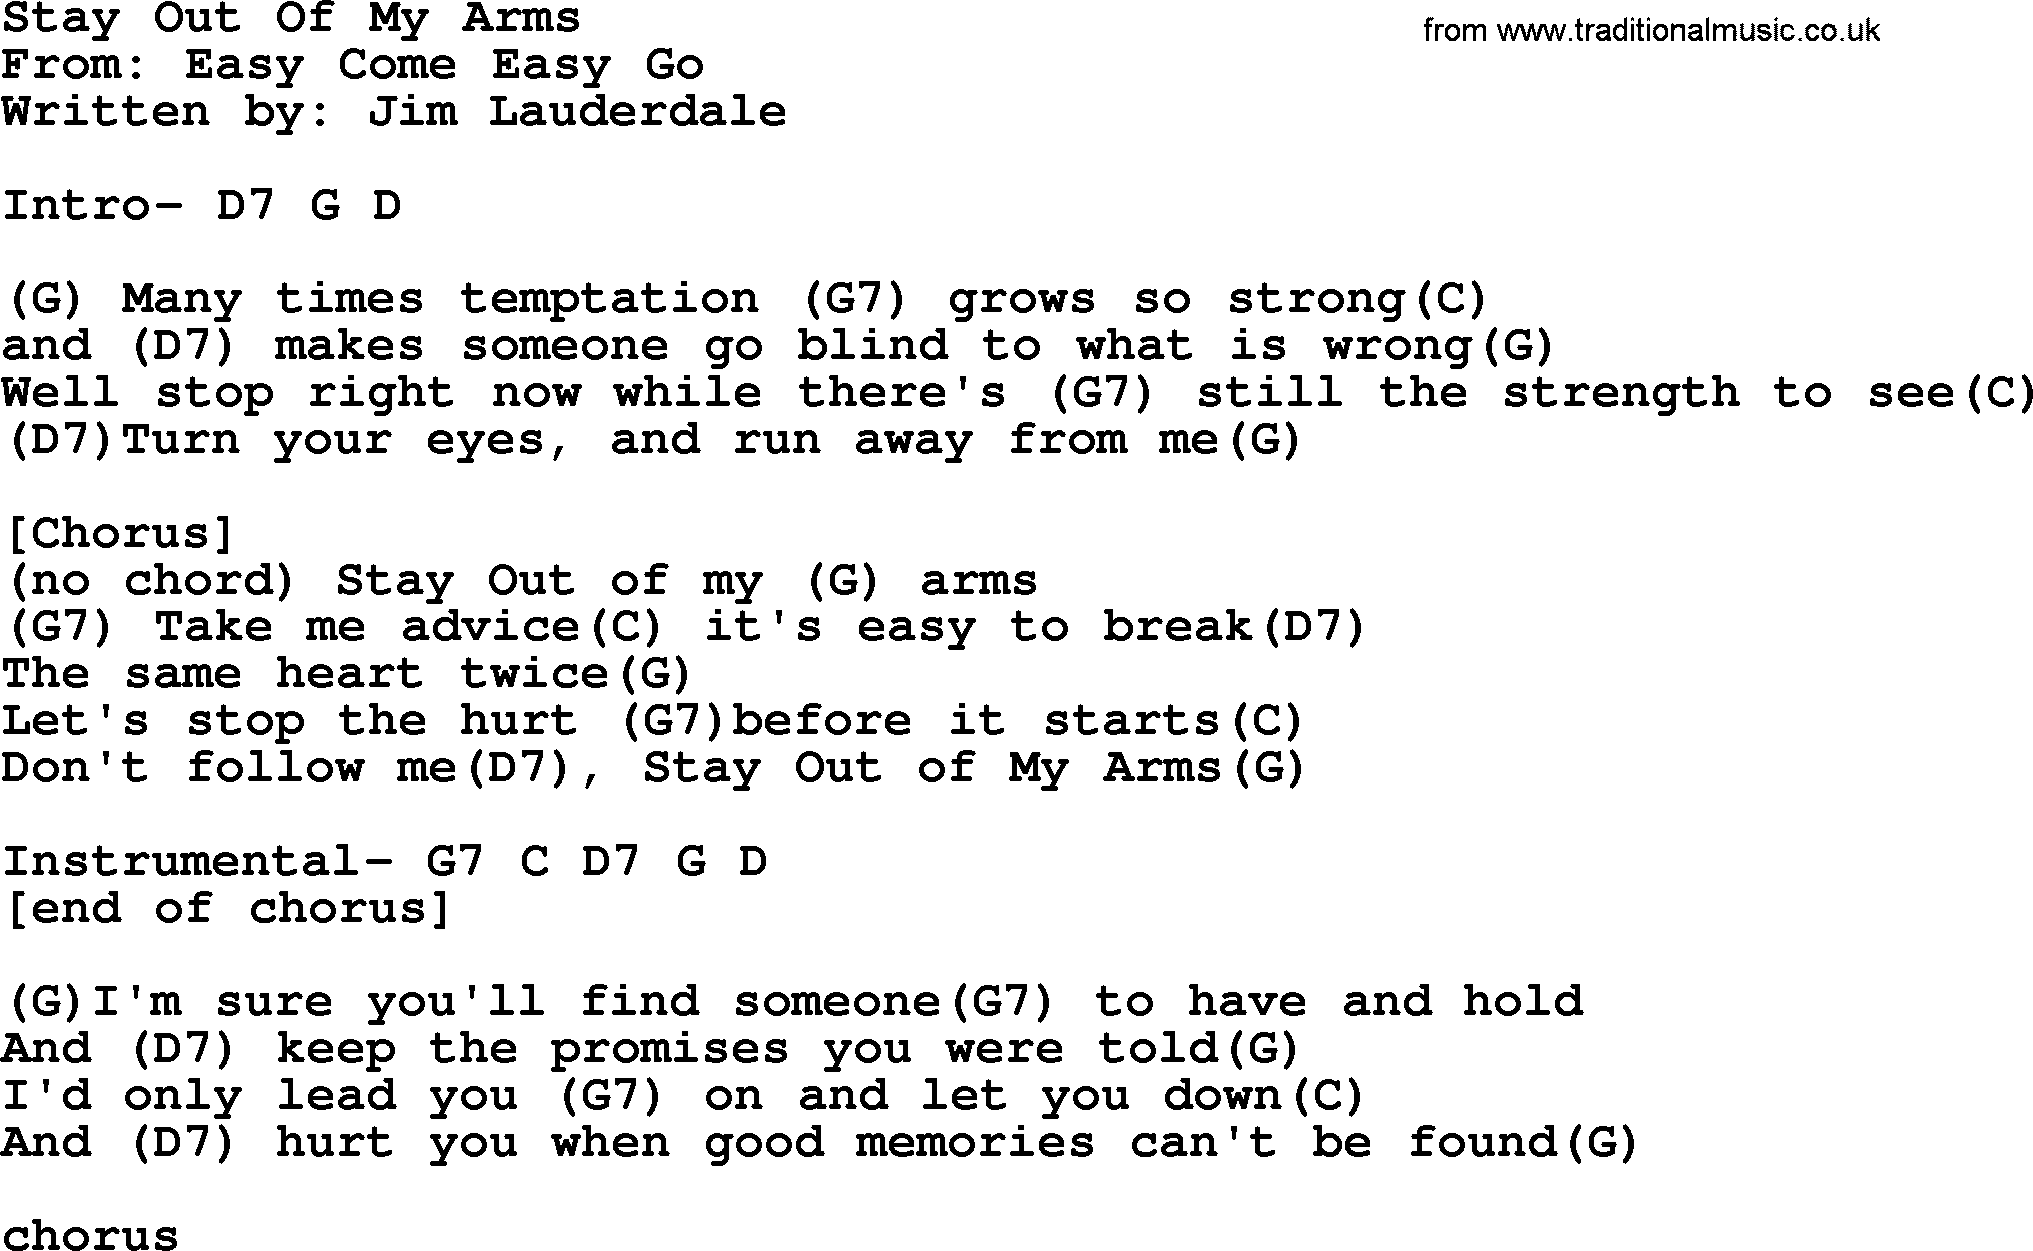 George Strait song: Stay Out Of My Arms, lyrics and chords